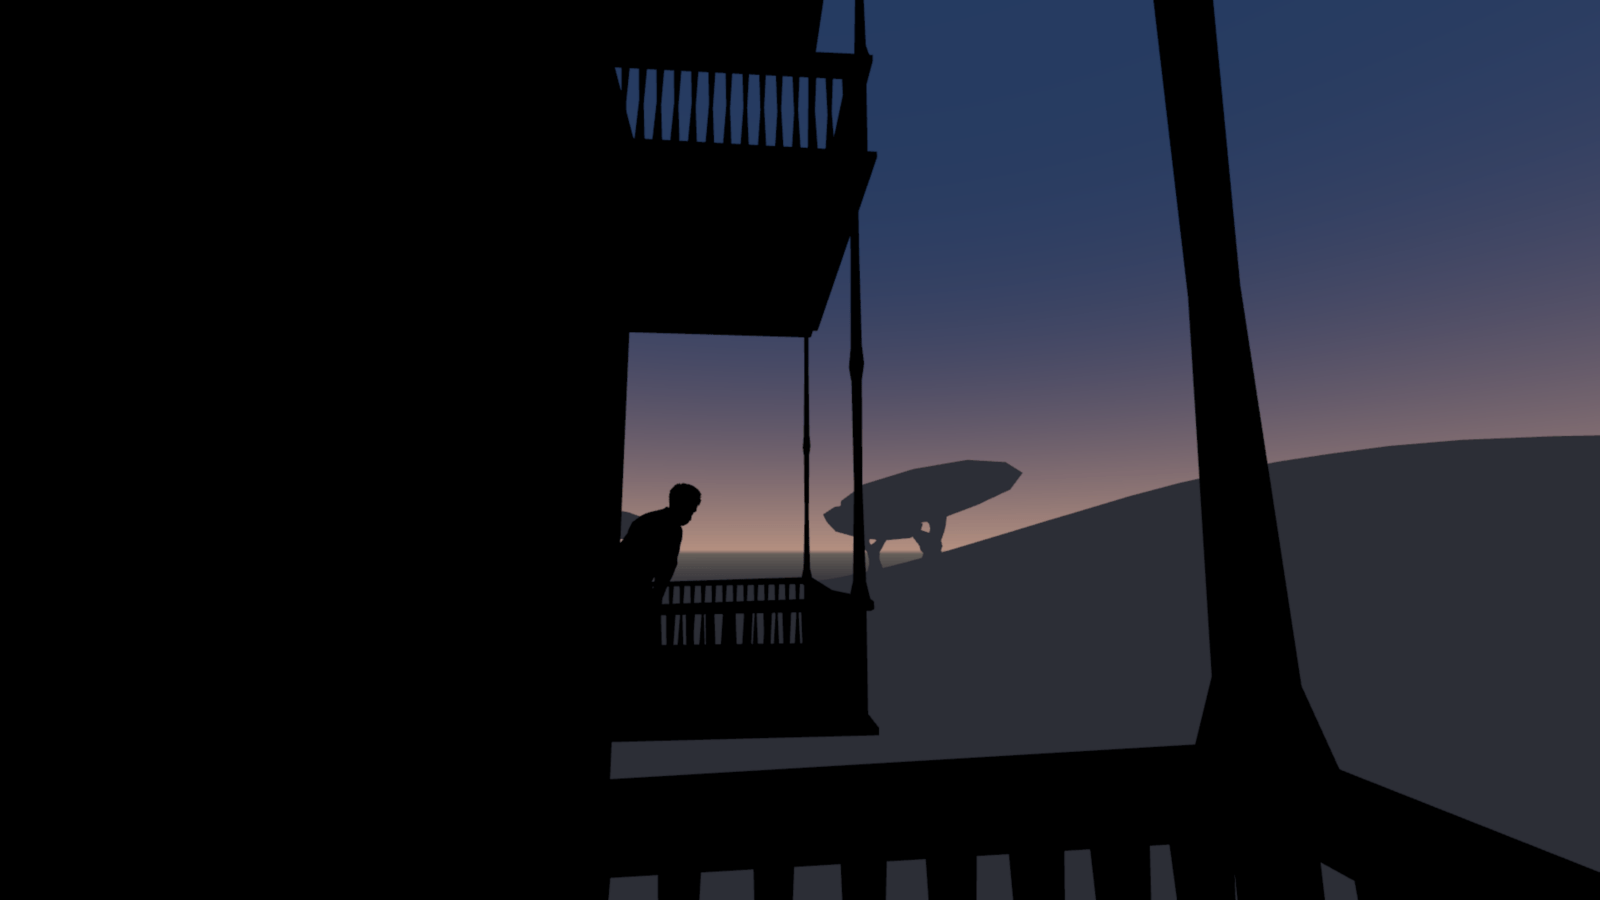 This is the first in a multipart videogame project titled Night Walks. Night Walks is a series of interconnected software objects that are intended to explore expressive, environmental entities that exist on the level of the landscape. On a private server, the player's actions are recorded, and Night Walks, in its various client instances, calls up this memory data and responds to it.

Night Walk 1 is a virtual reality landscape, where the player is on a balcony surrounded by and isolated from silhouetted neighbors. The environment records certain actions the player performs related to their gaze and this data is sent to the  server, to be interpreted by other software objects in the series. The landscape comes toward the player like a wave and repeatedly crashes over them, leaving them in temporary darkness.